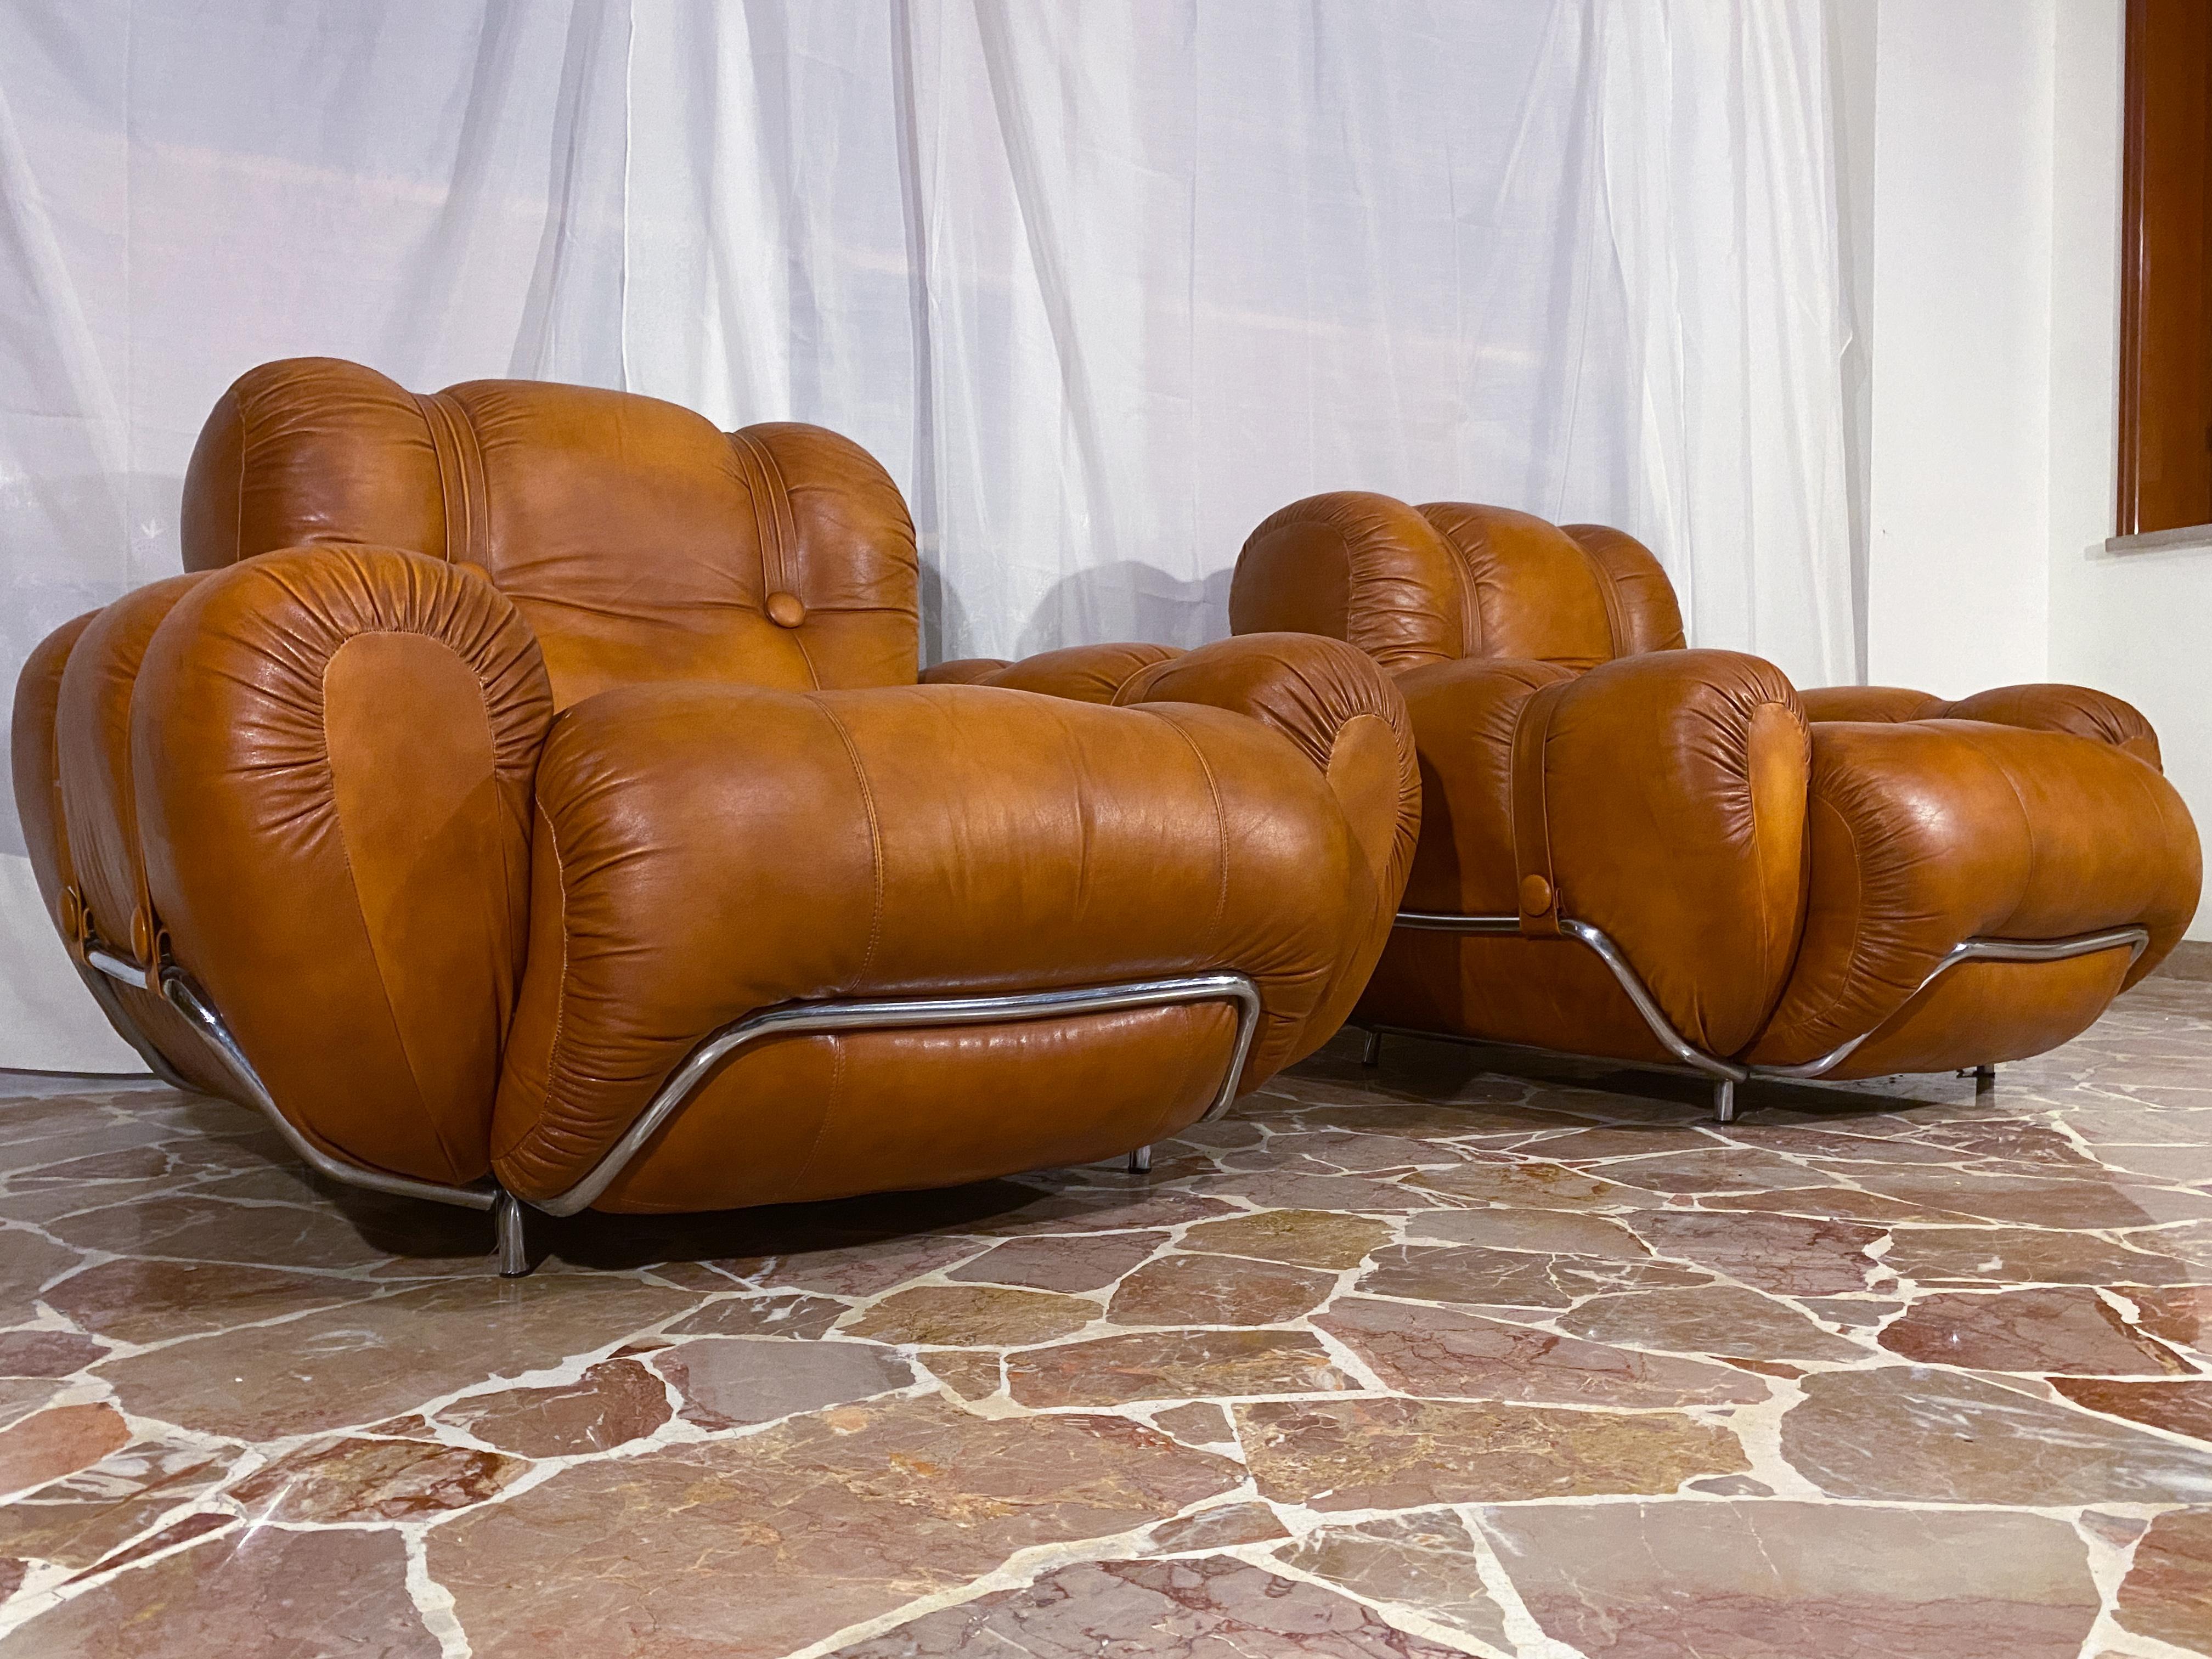 Italian Mid-Century Natural Leather Space Age Armchairs, 1970s For Sale 2